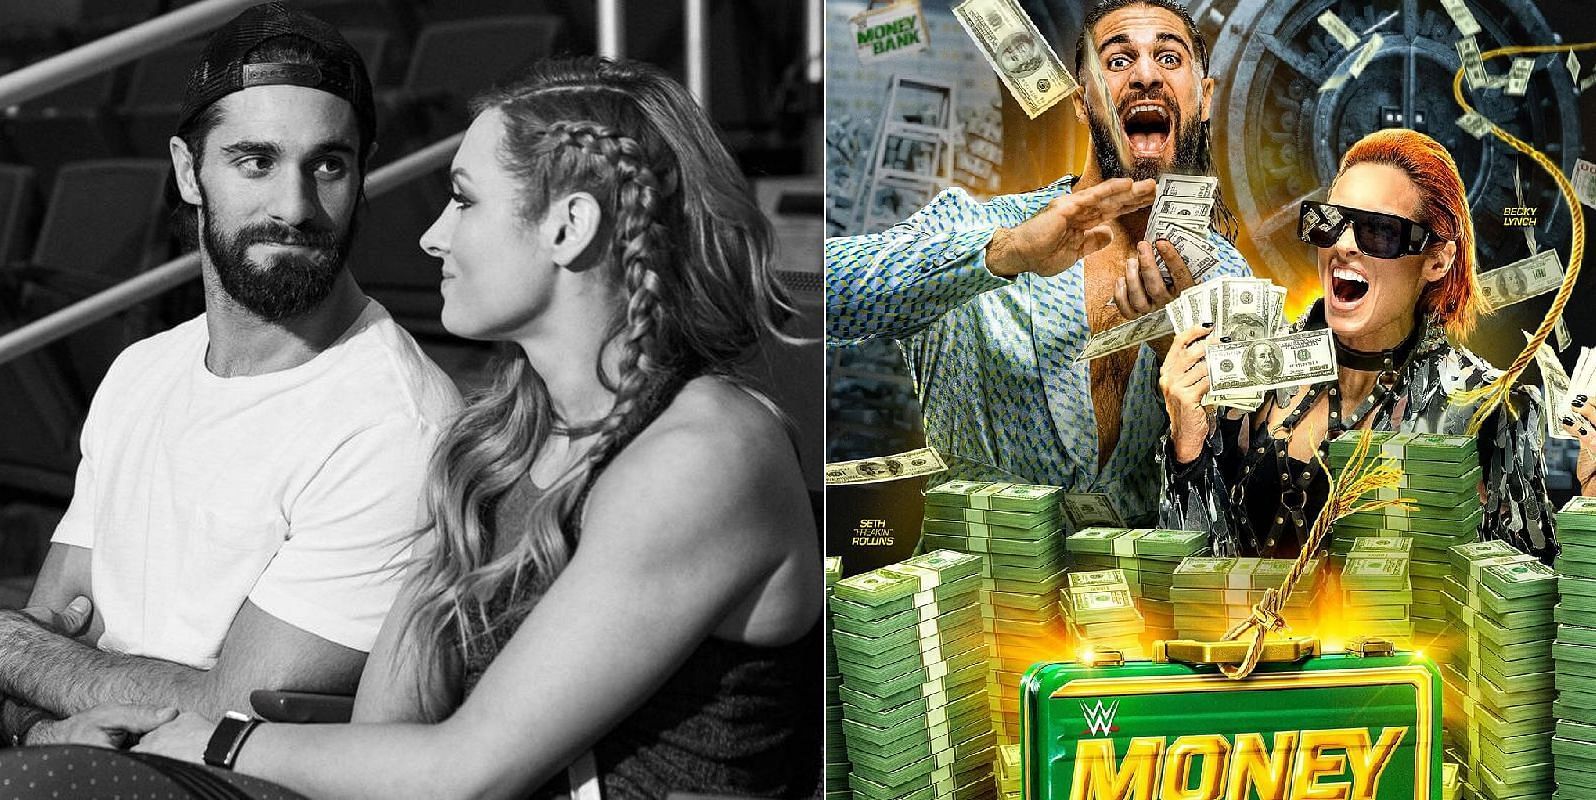 Money in the Bank could contain a host of surprises